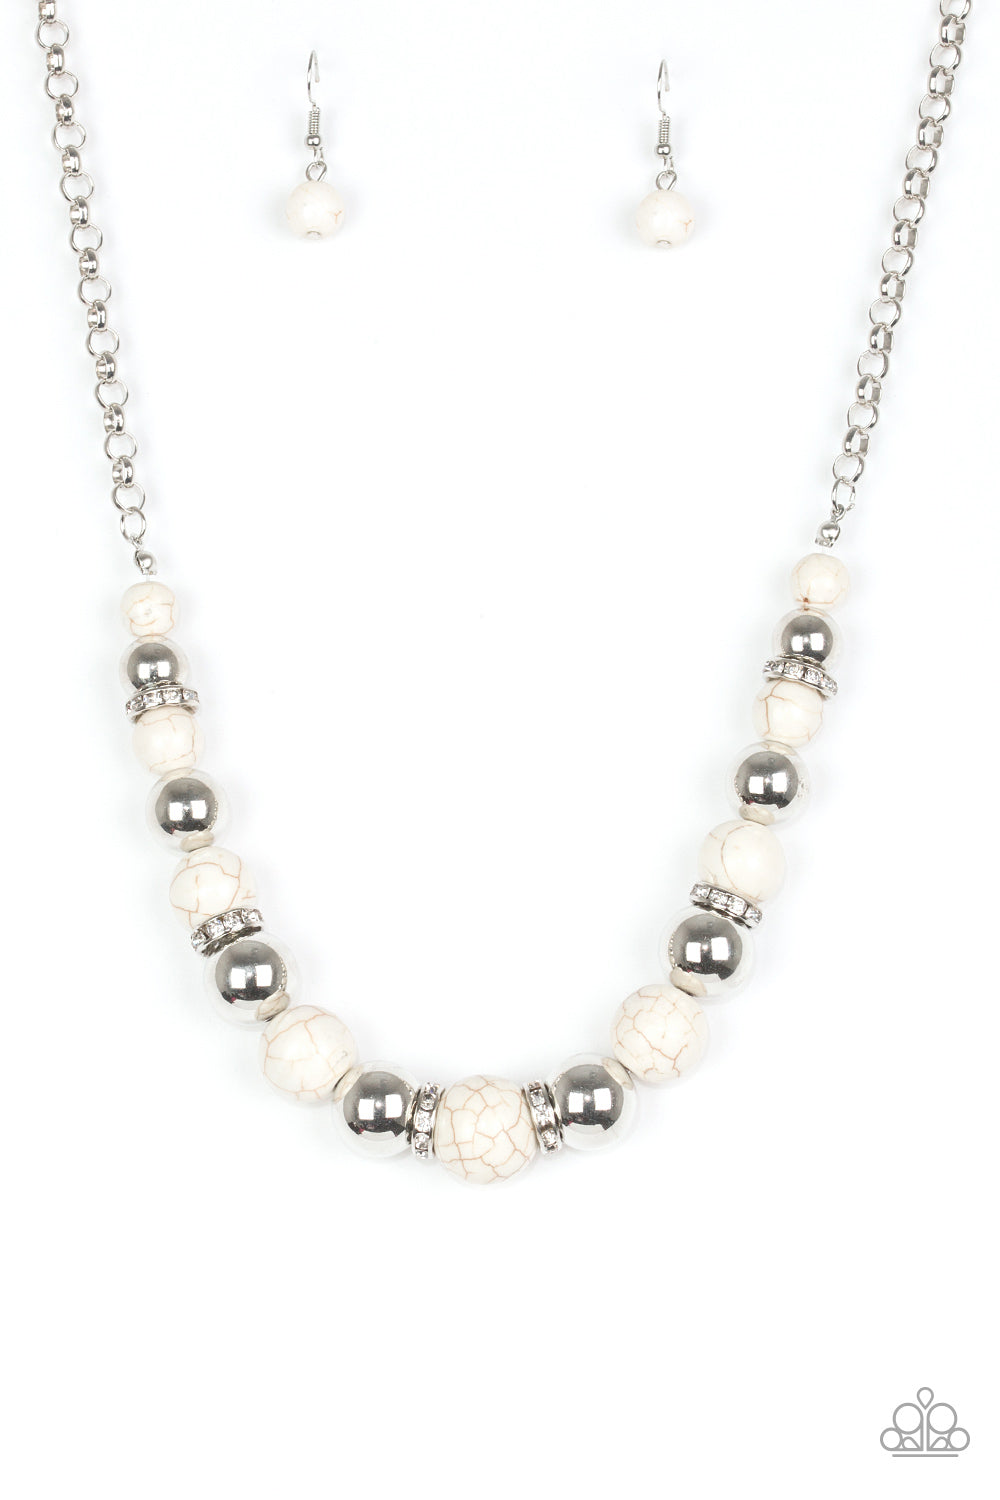 Paparazzi The Ruling Class White Stone Short Necklace